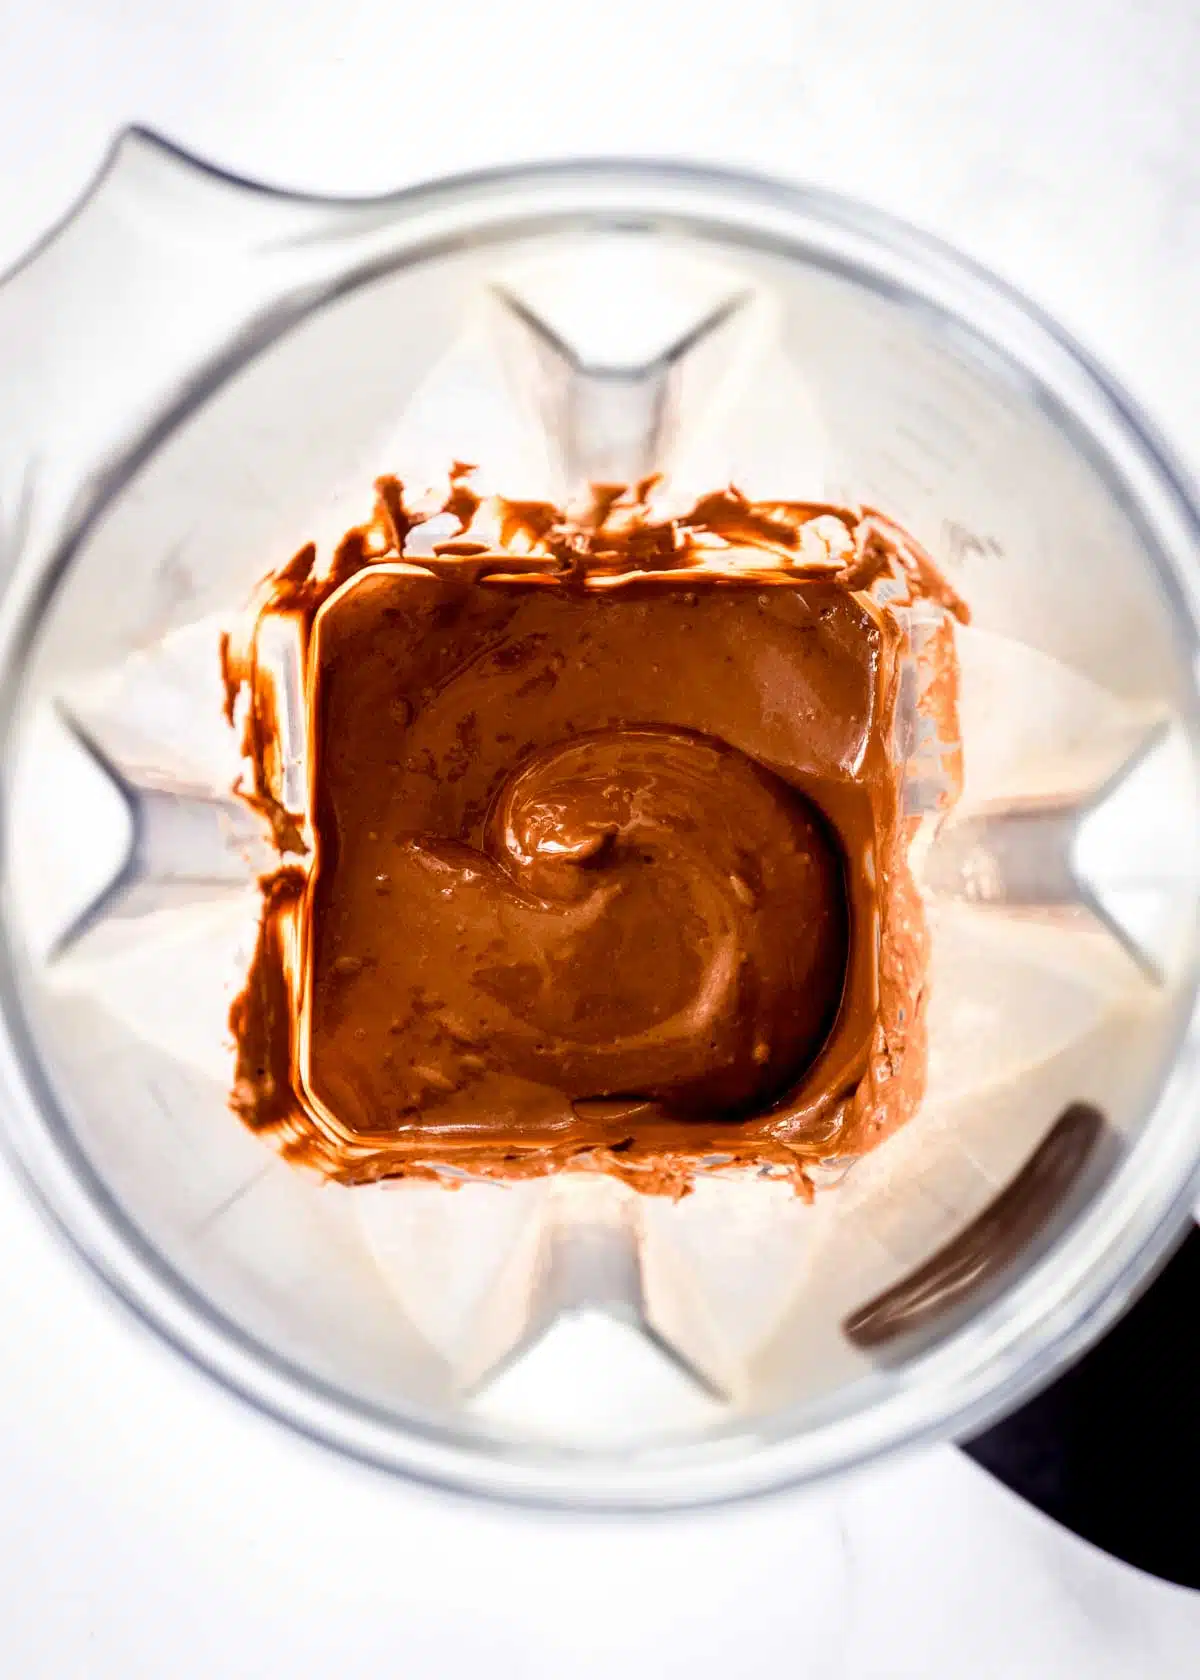 A blender full of chocolate mousse with avocados.